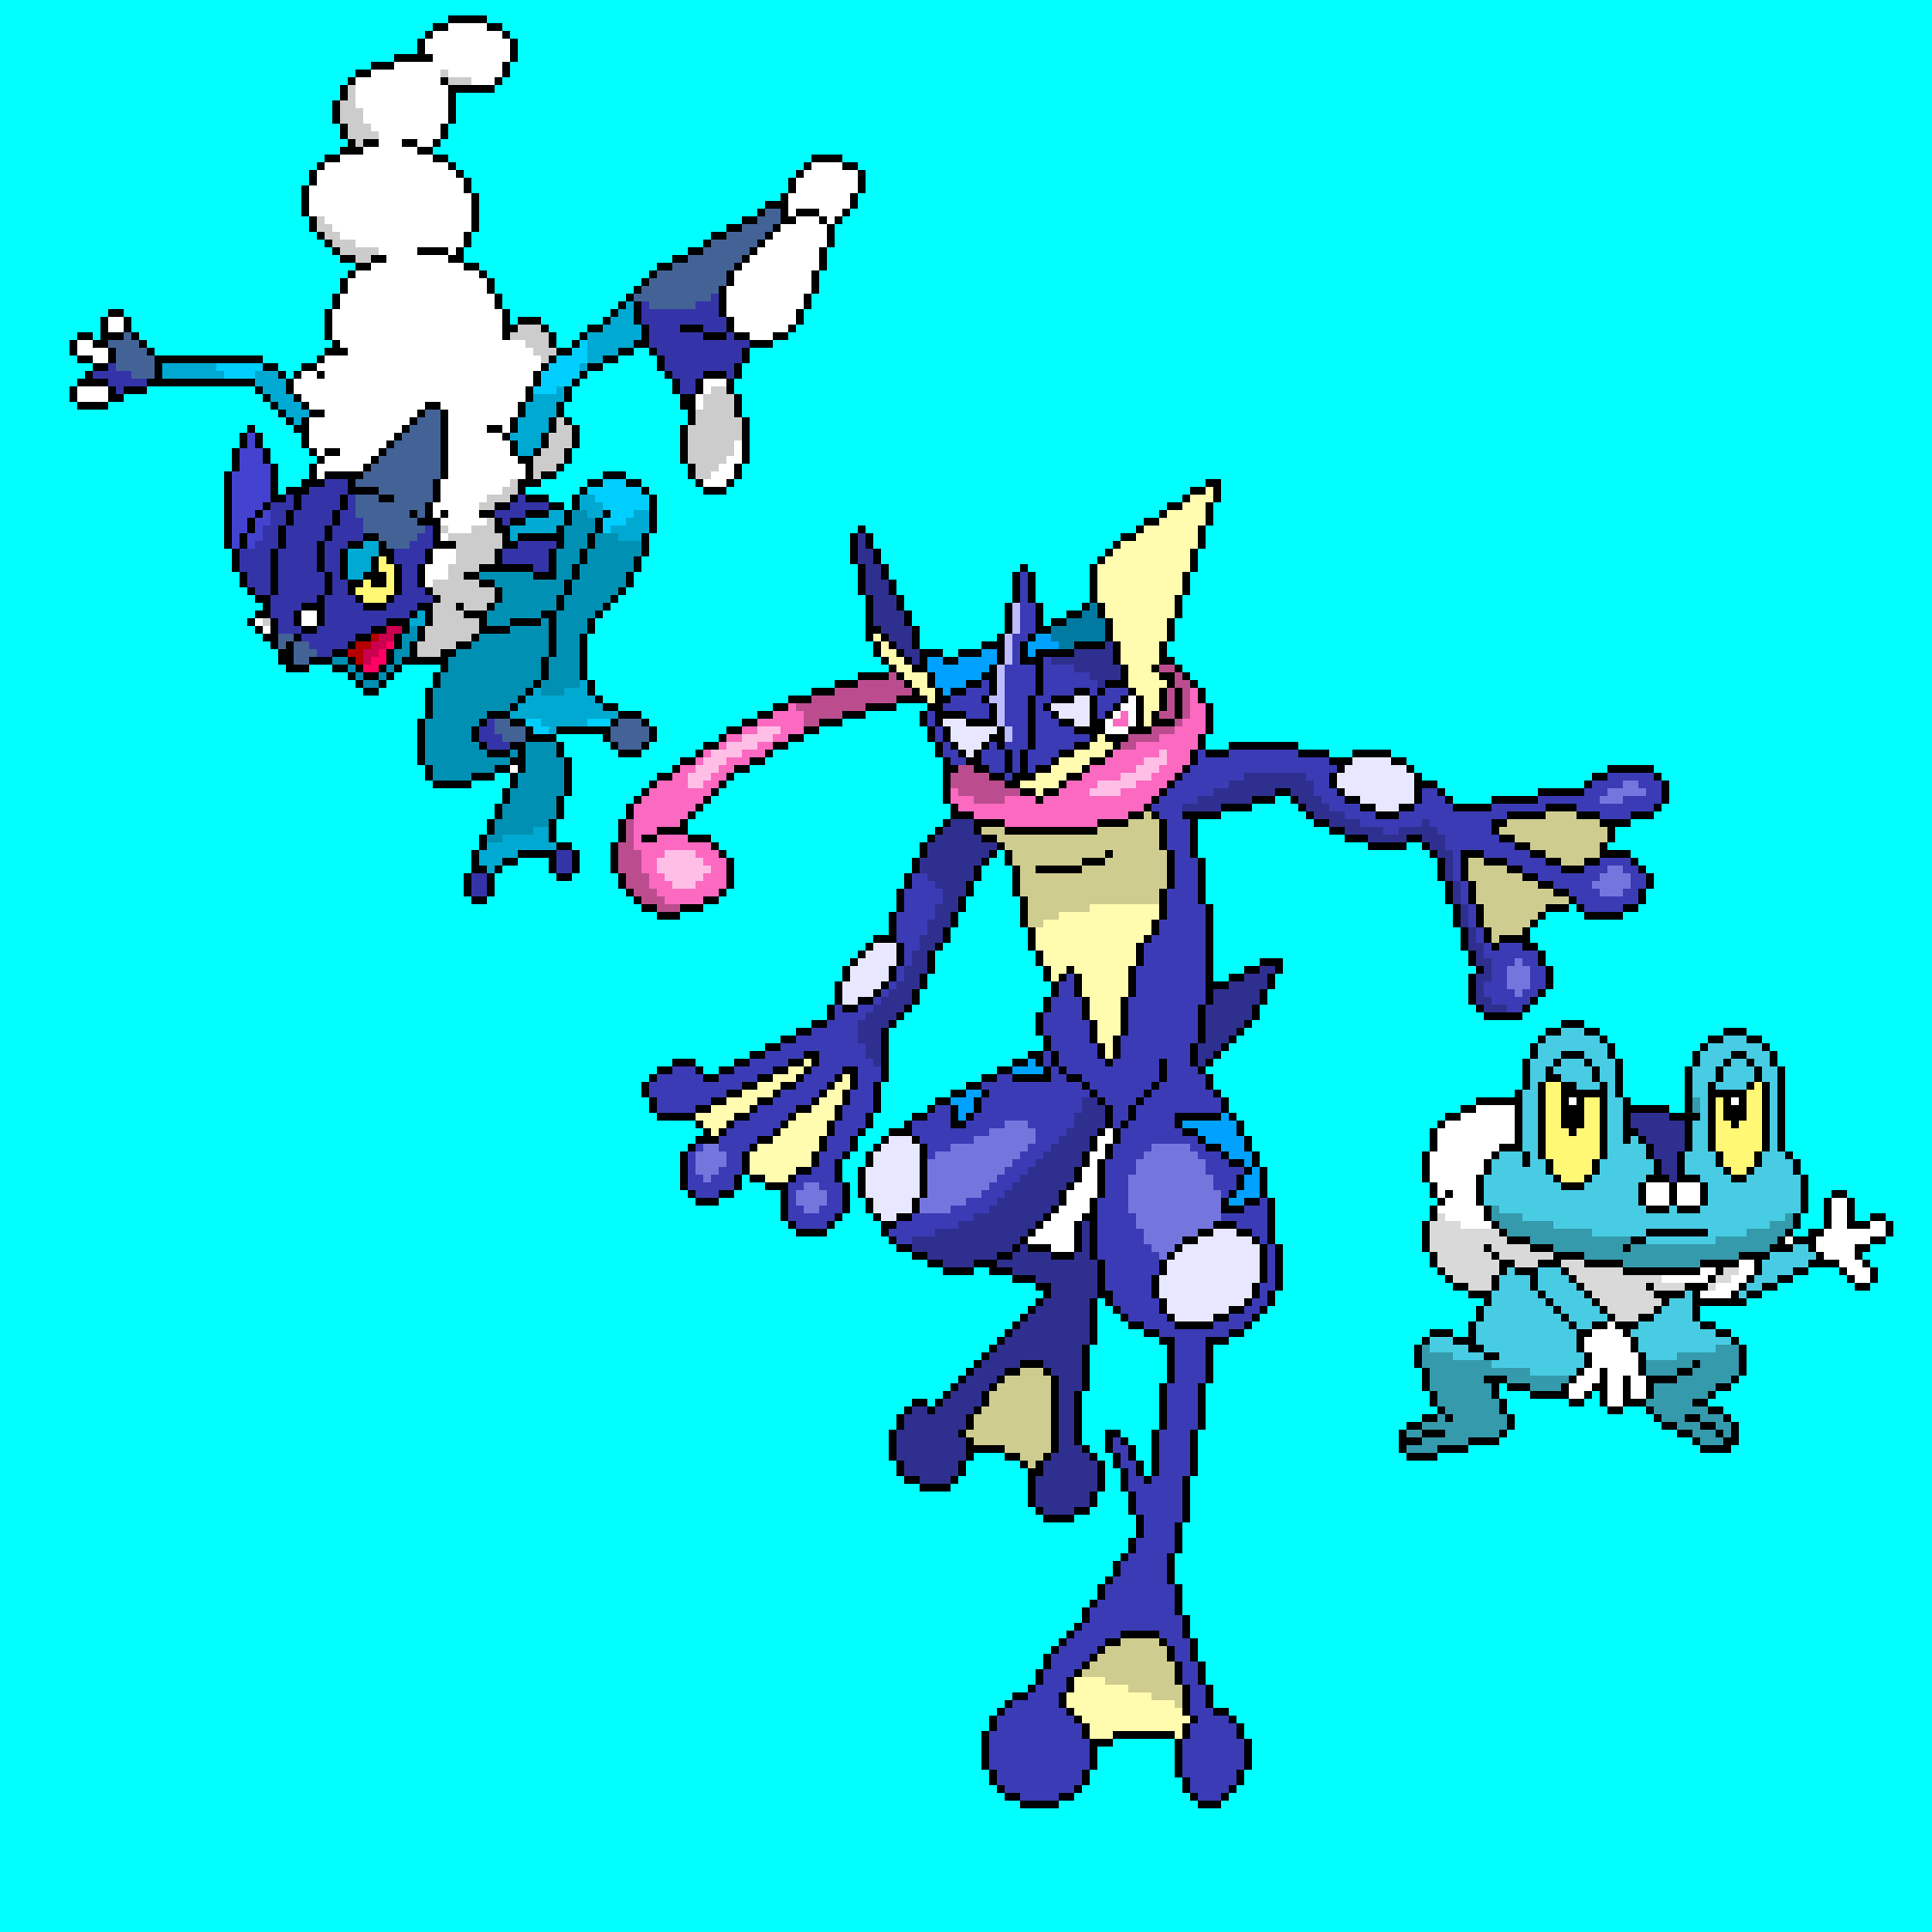 The 3 Ninja Frogs (Might make a better background later)